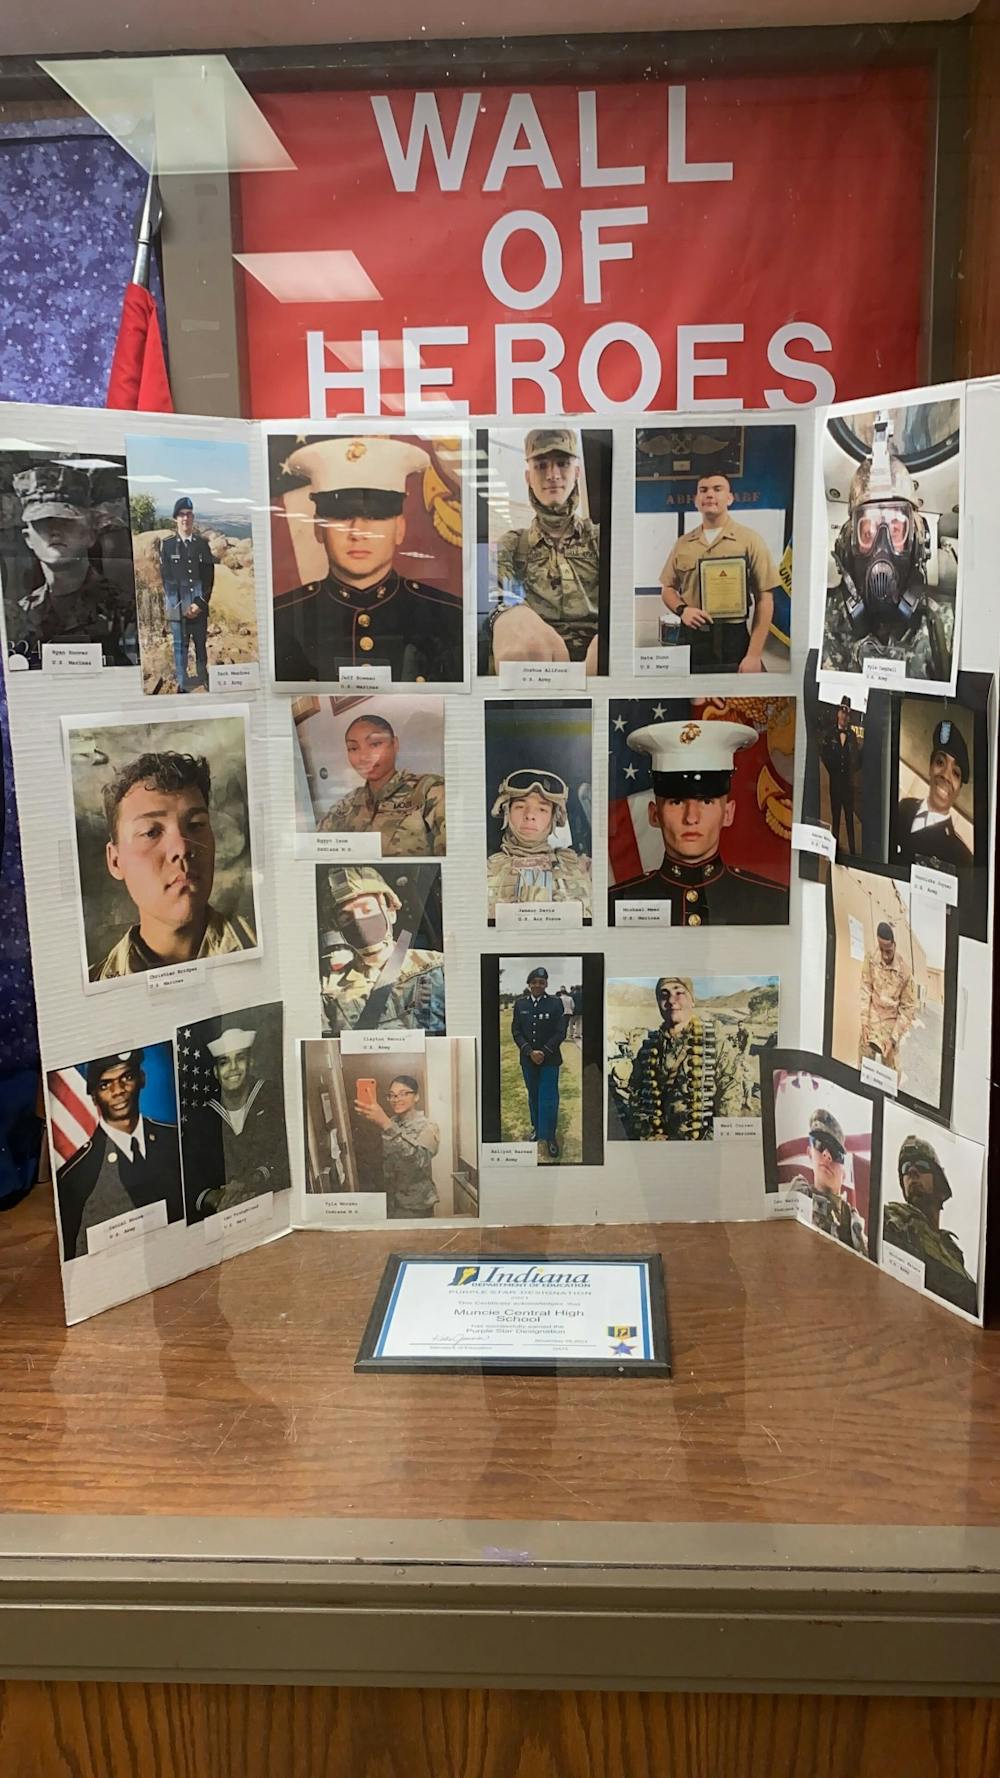 <p>Muncie Central High School&#x27;s (MCHS) &quot;Wall of Heroes&quot; display, depicting former students who went onto serve in the military. MCHS was designated a Purple Star school in 2021 by the Indiana Department of Education for its programs and services honoring veterans and their families. Richard Kann, DN</p>